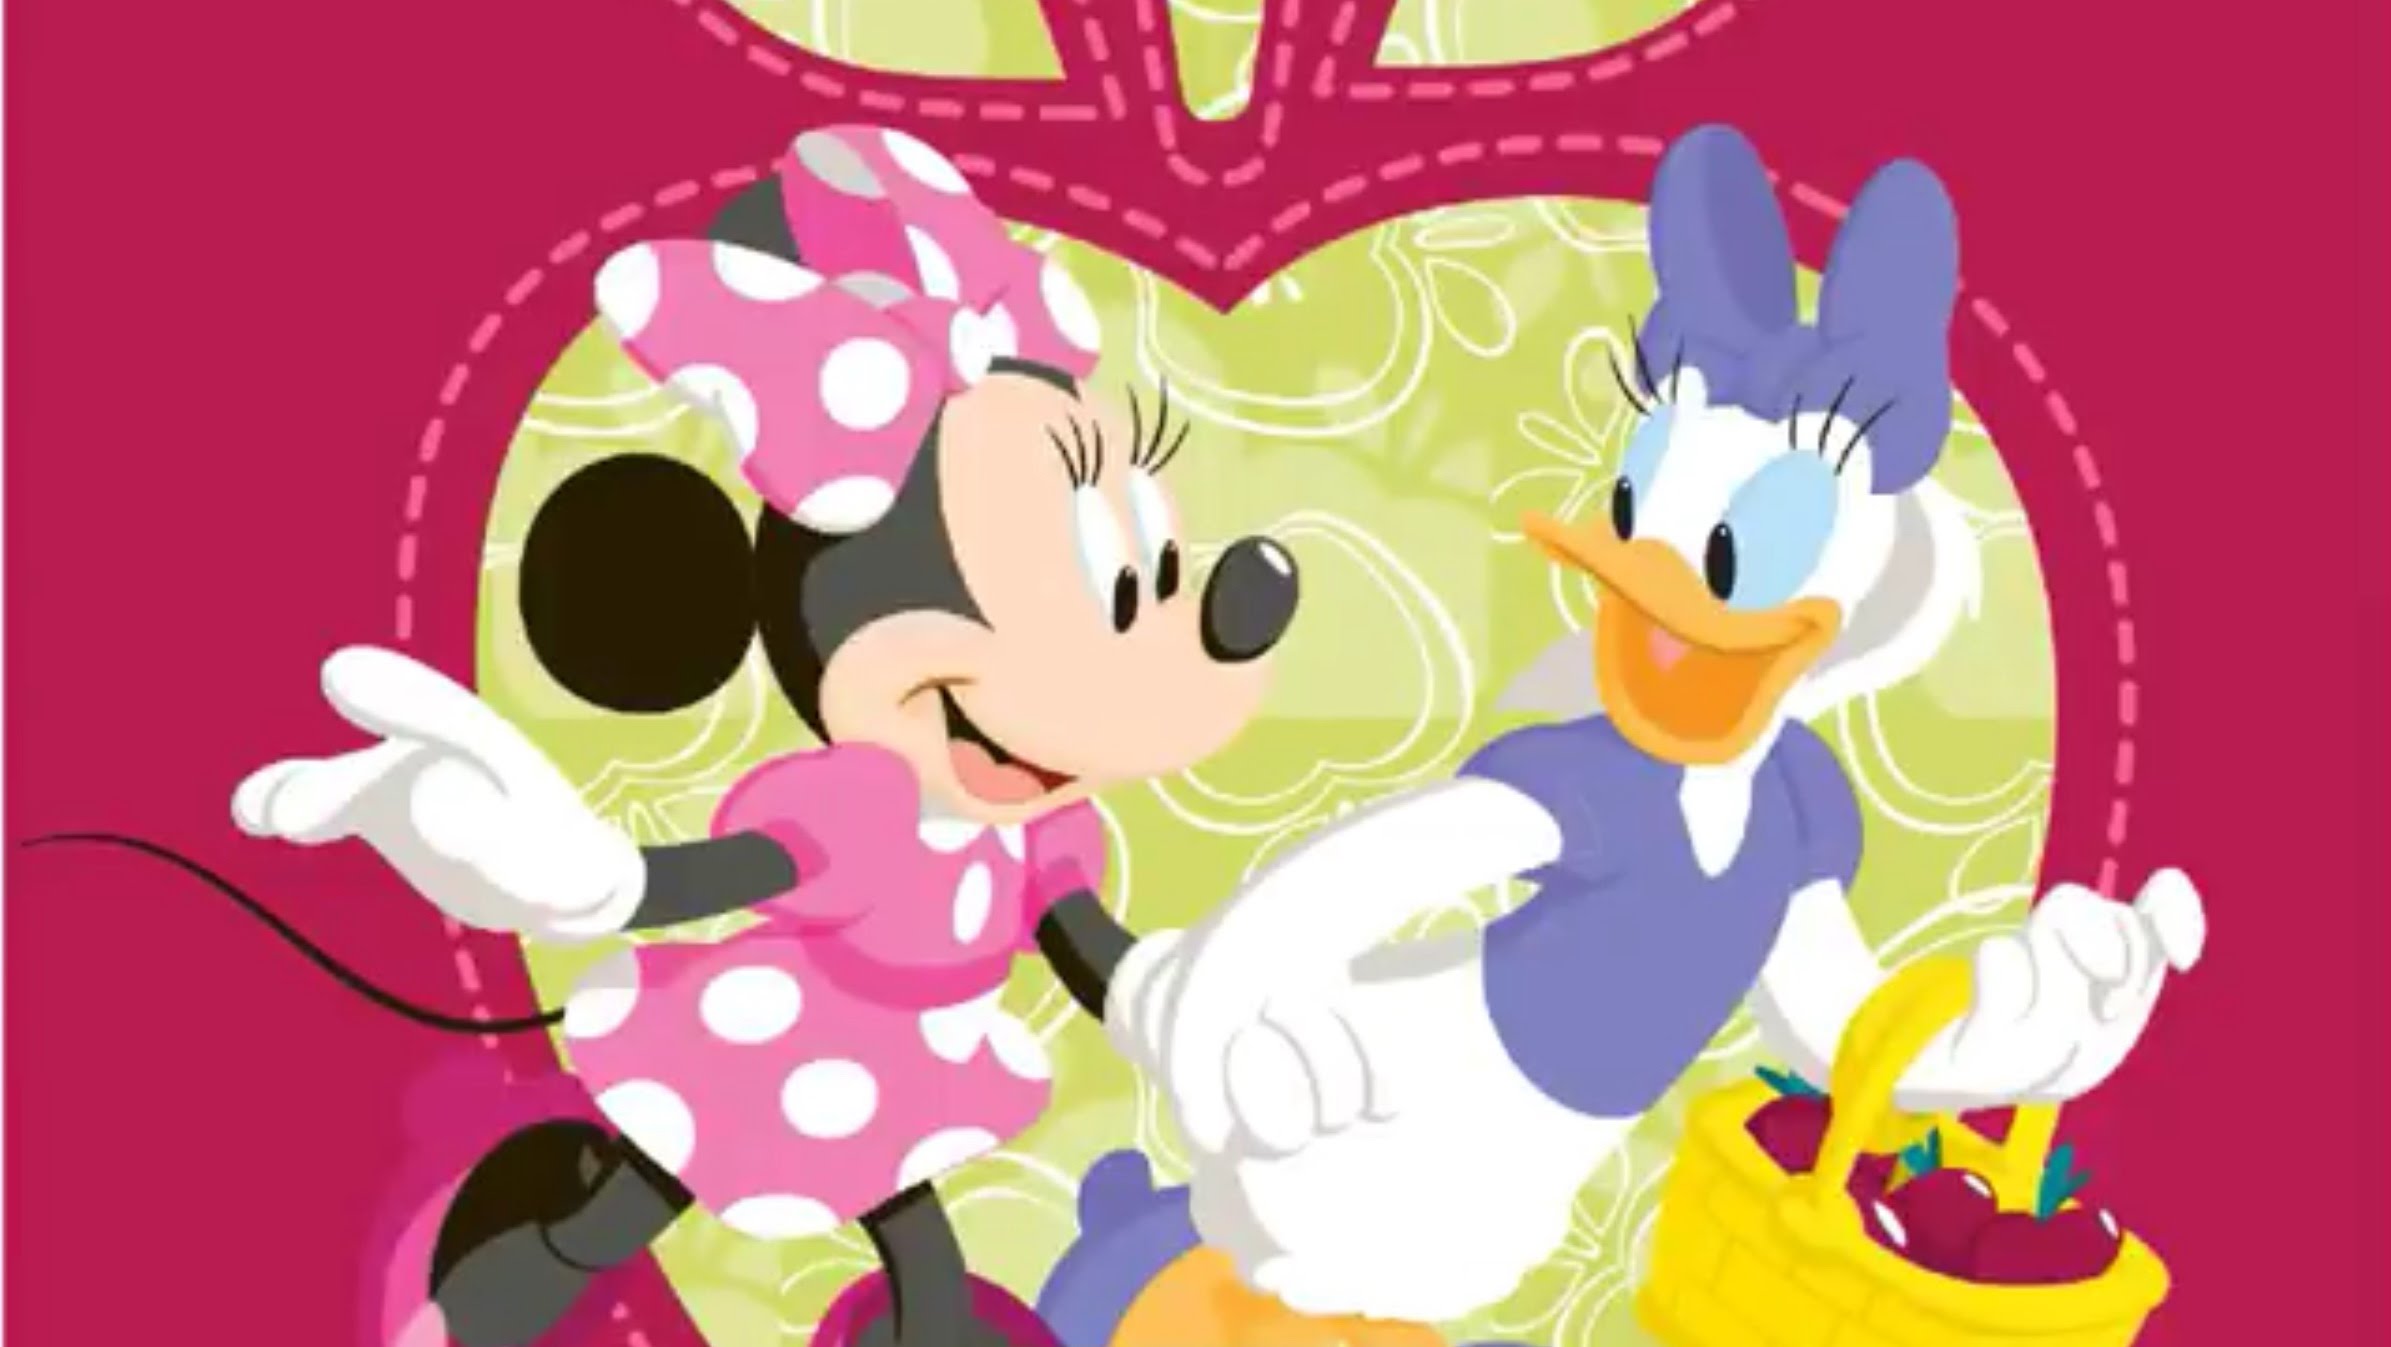 Amazing Minnie Mouse & Daisy Duck Pictures & Backgrounds